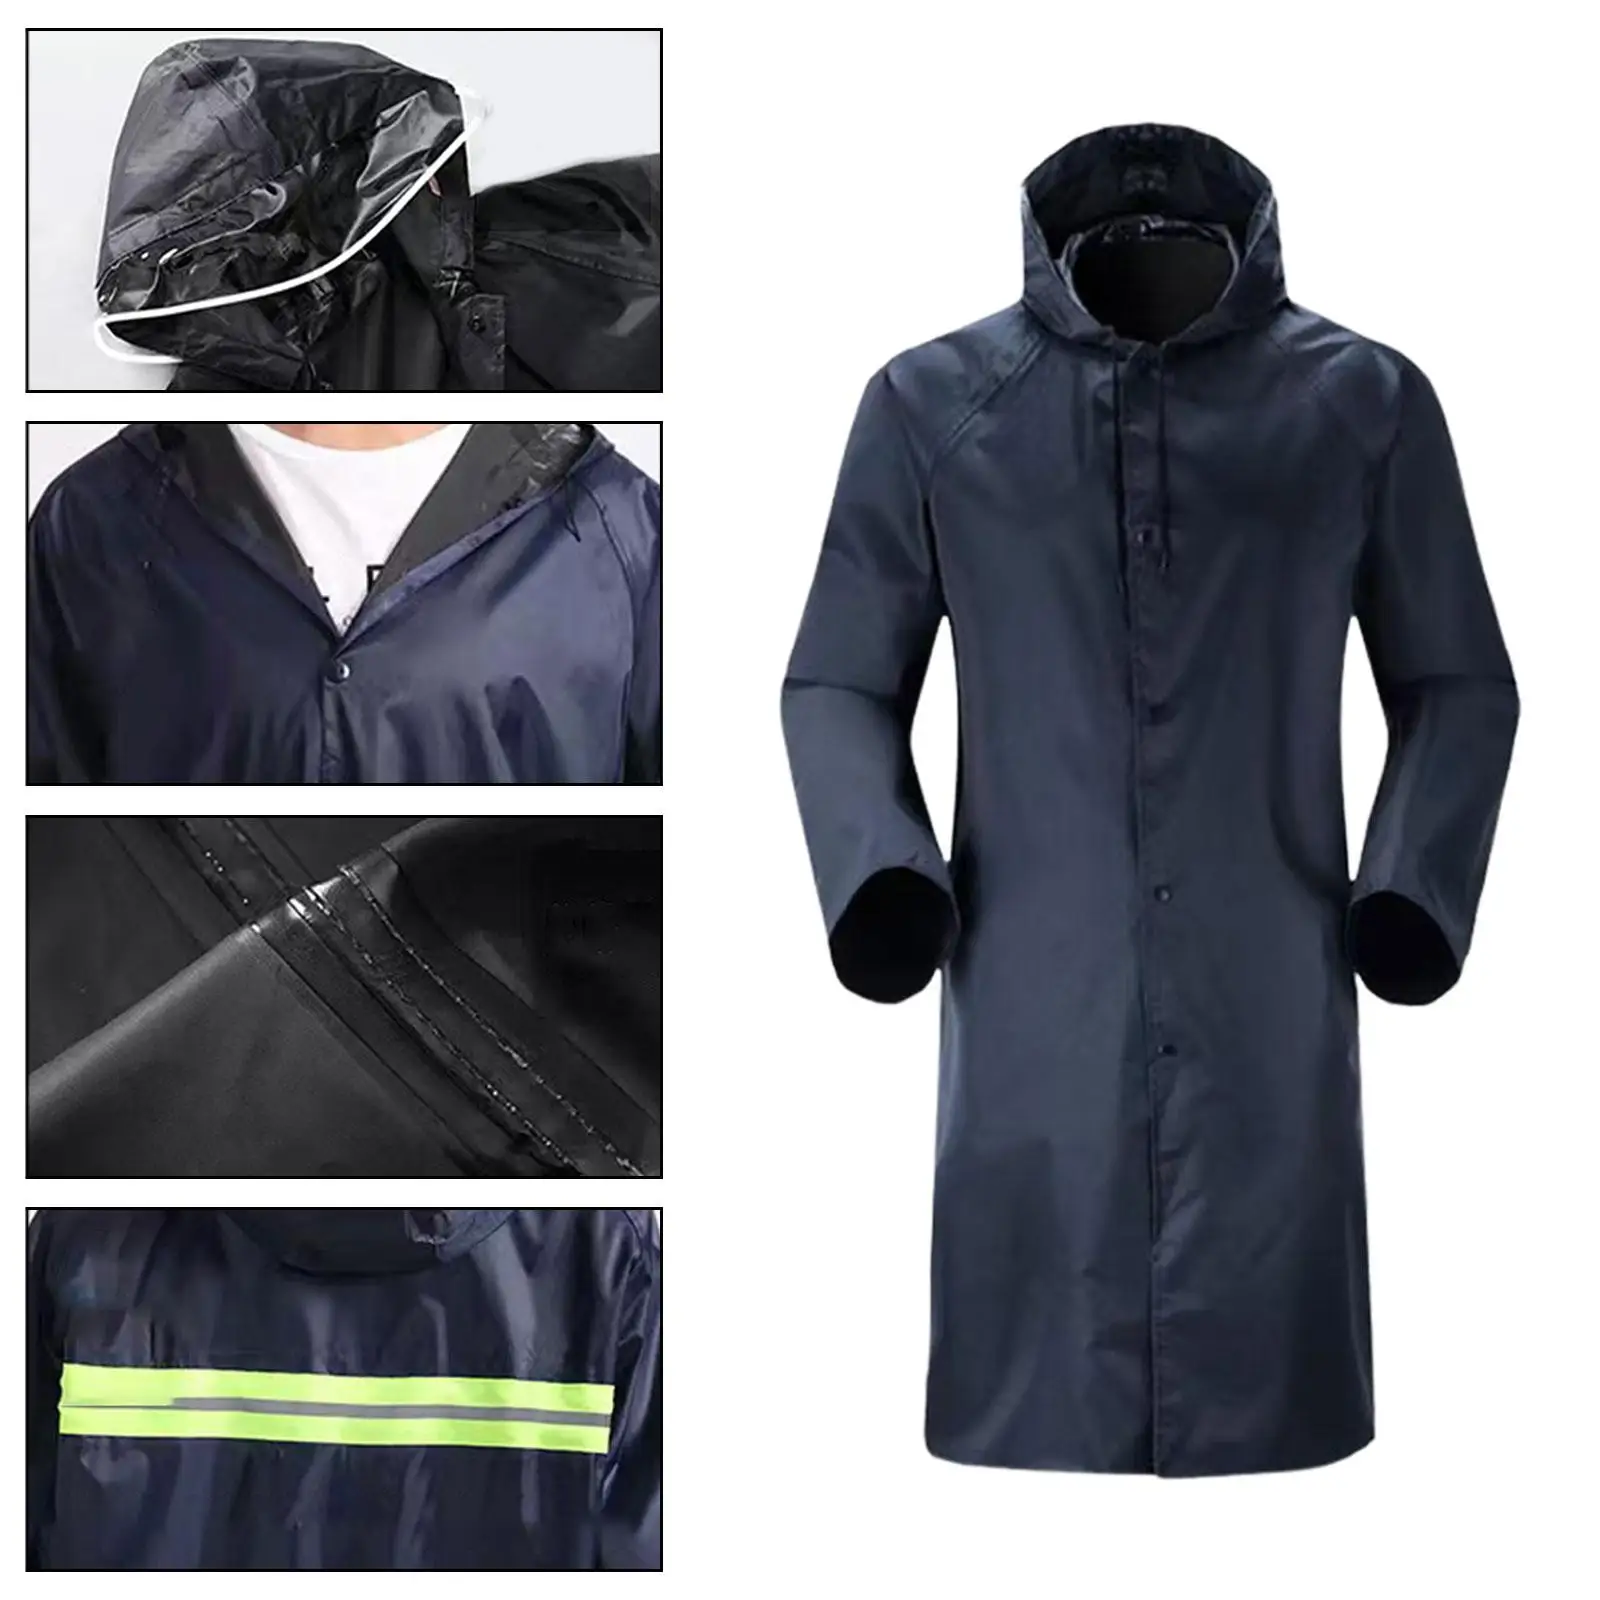 Rain Jacket Work Clothing Overalls with Fluorescent Strips Rain Coat for Unisex Cycling Outdoor Activities Motorcycle Travel